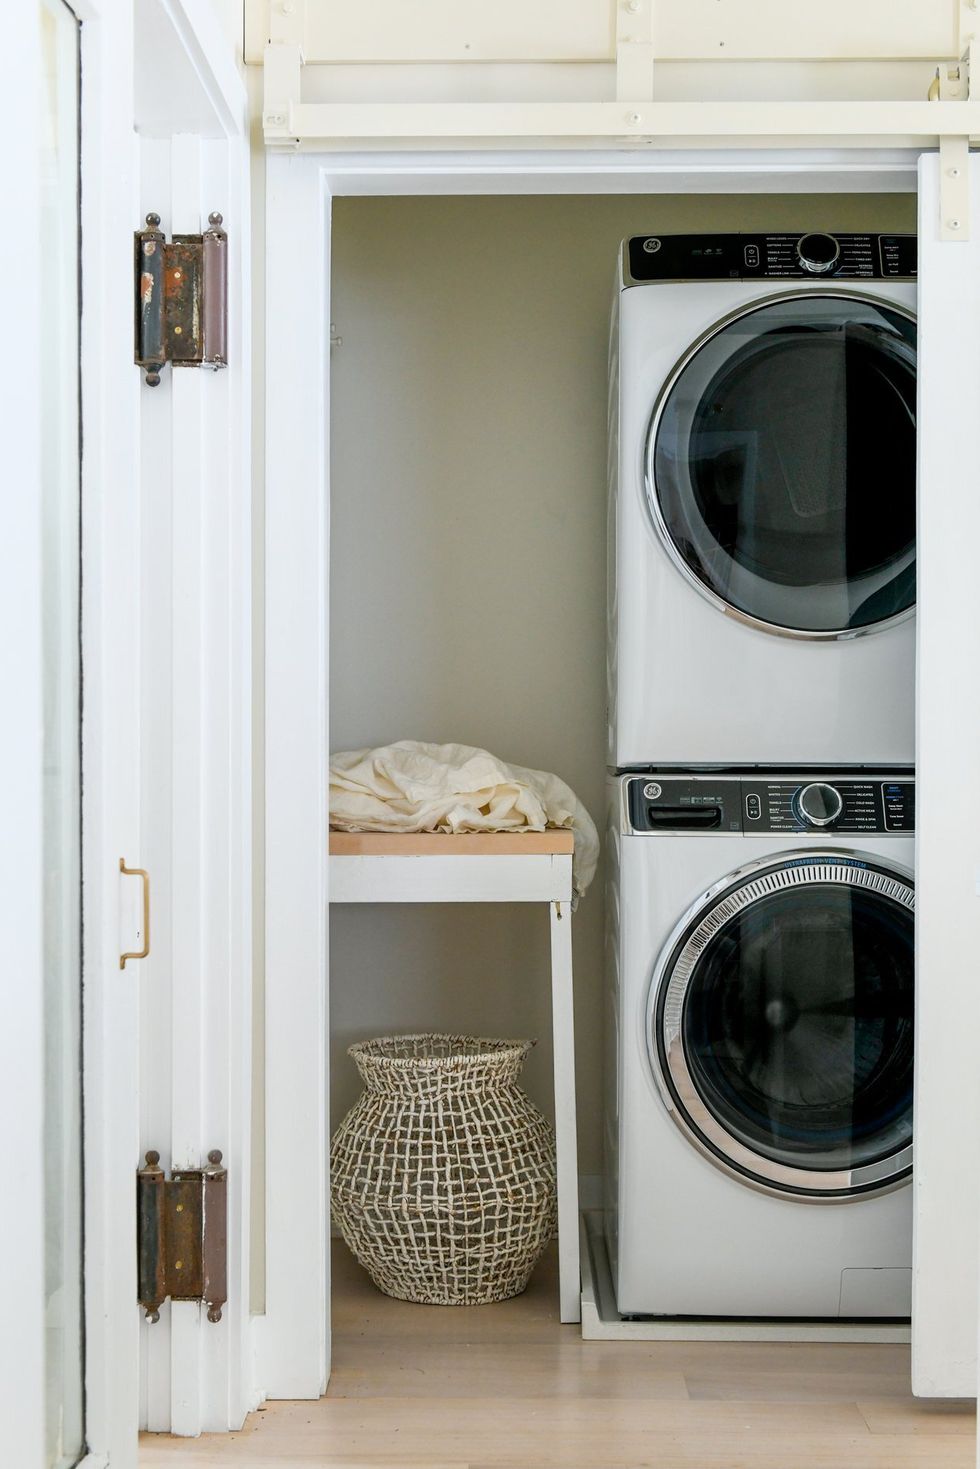 6 Ideas to Make a Small Laundry Room Work Better